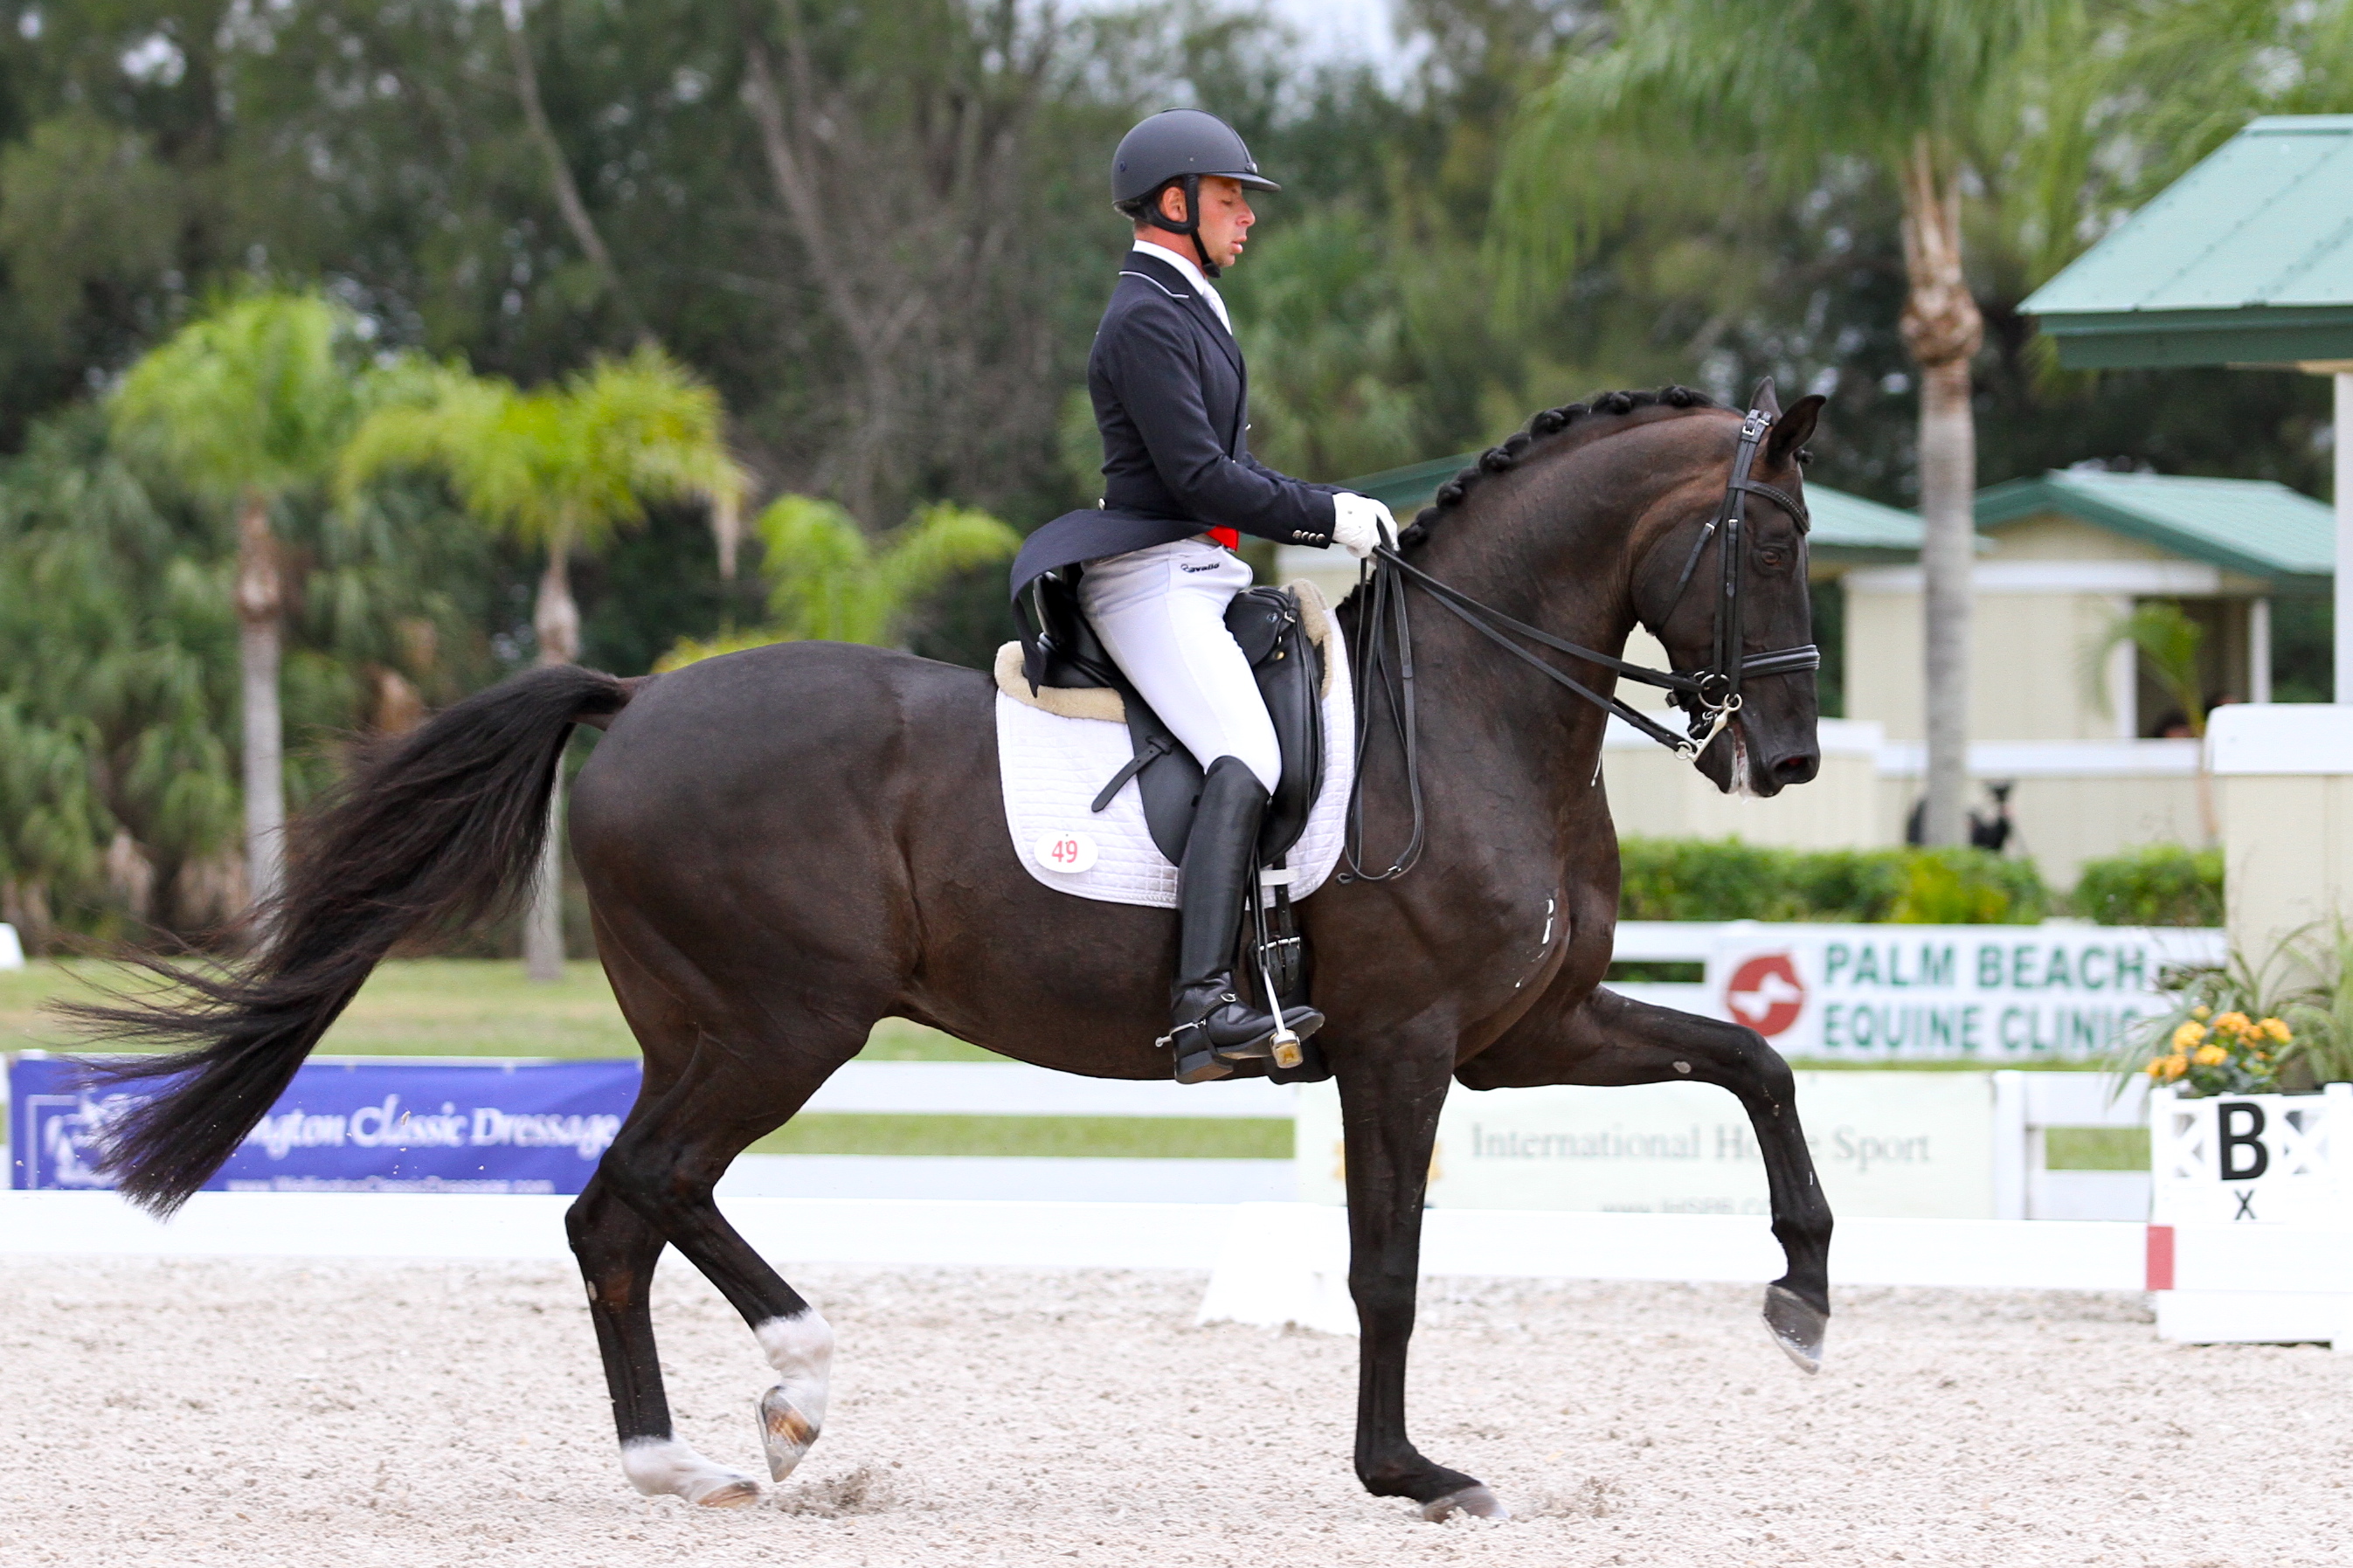 David Marcus and Don Kontes at the 2013 Palm Beach Dressage Derby CDI-W